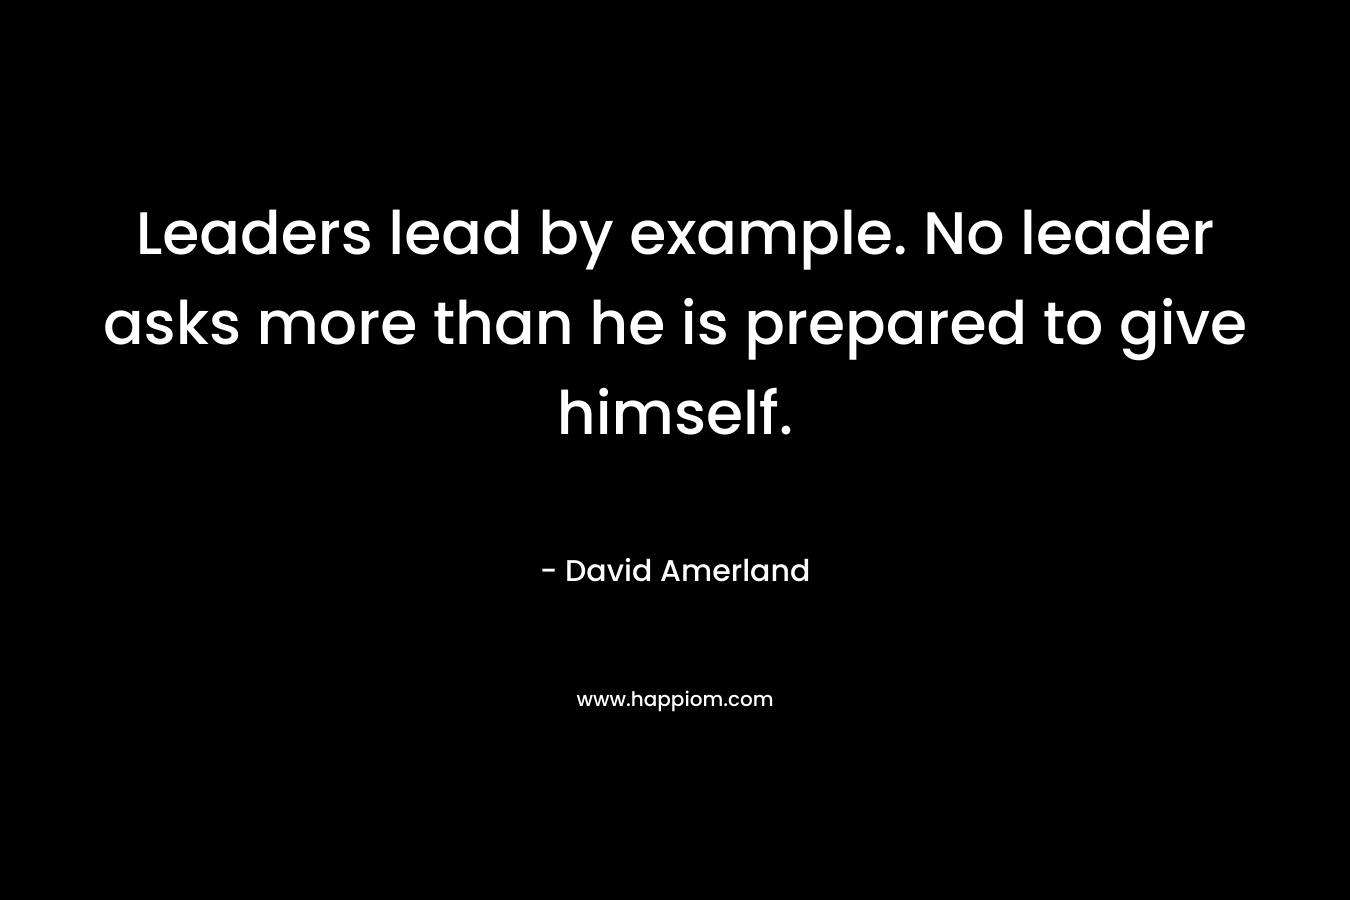 Leaders lead by example. No leader asks more than he is prepared to give himself.